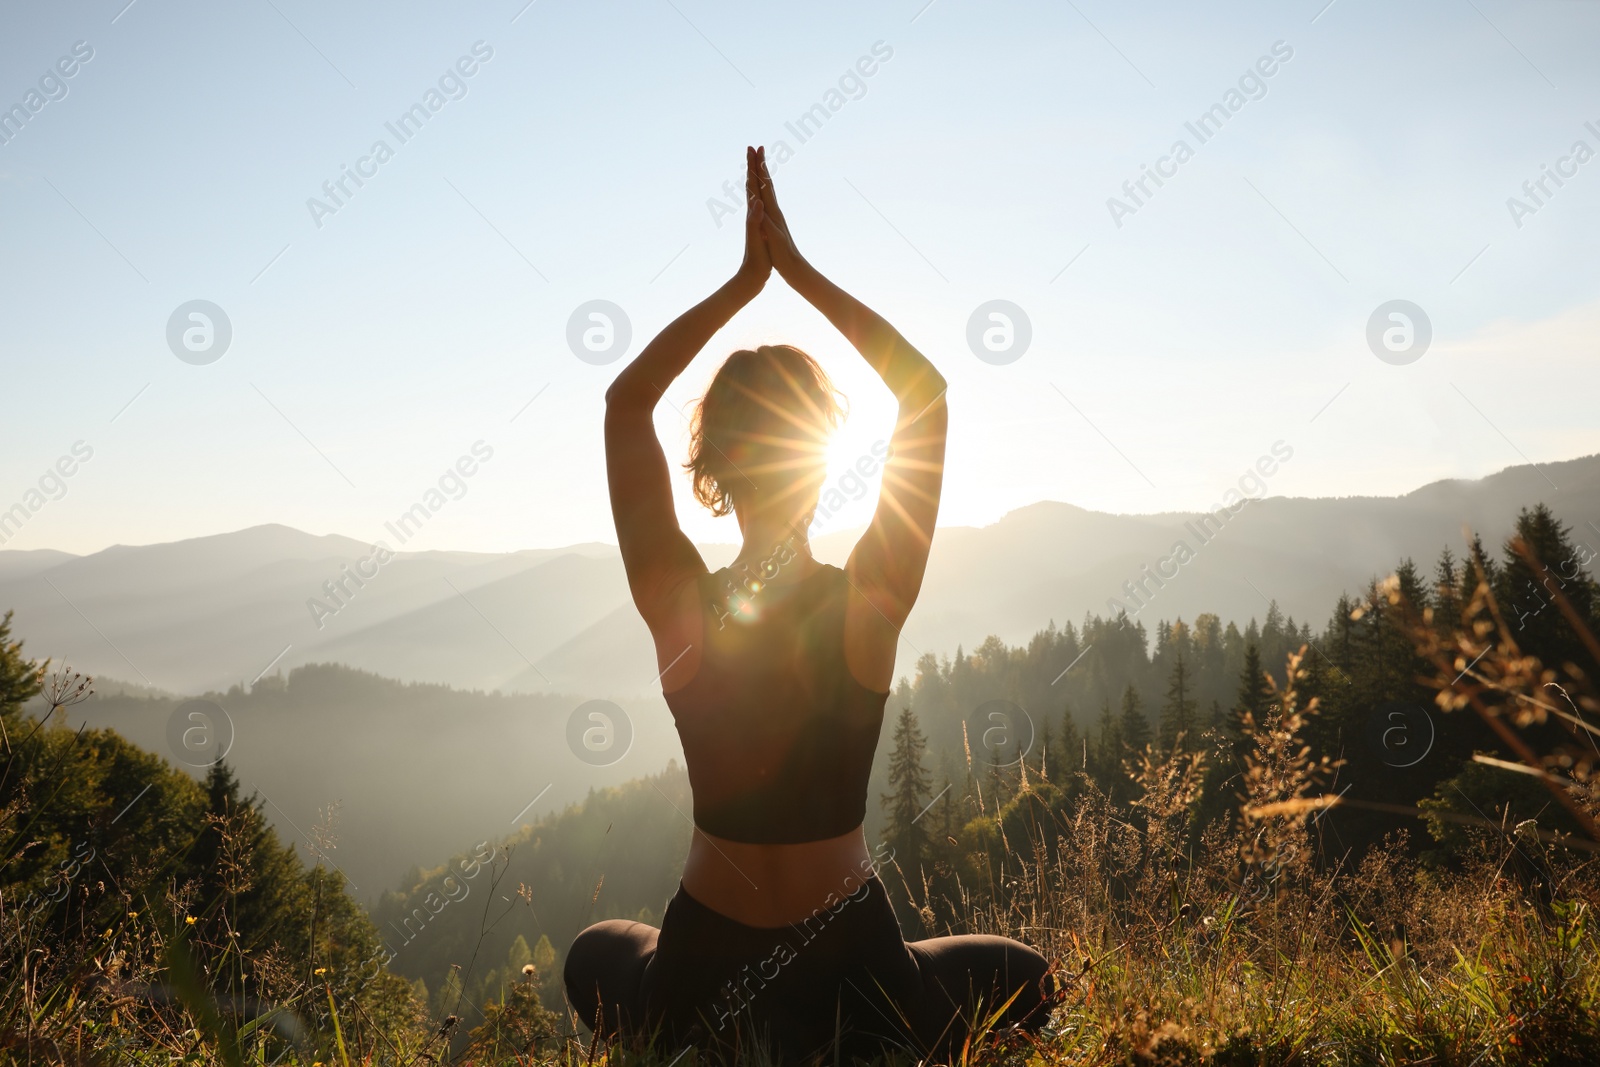 Image of Woman practicing yoga in mountains at sunrise, back view